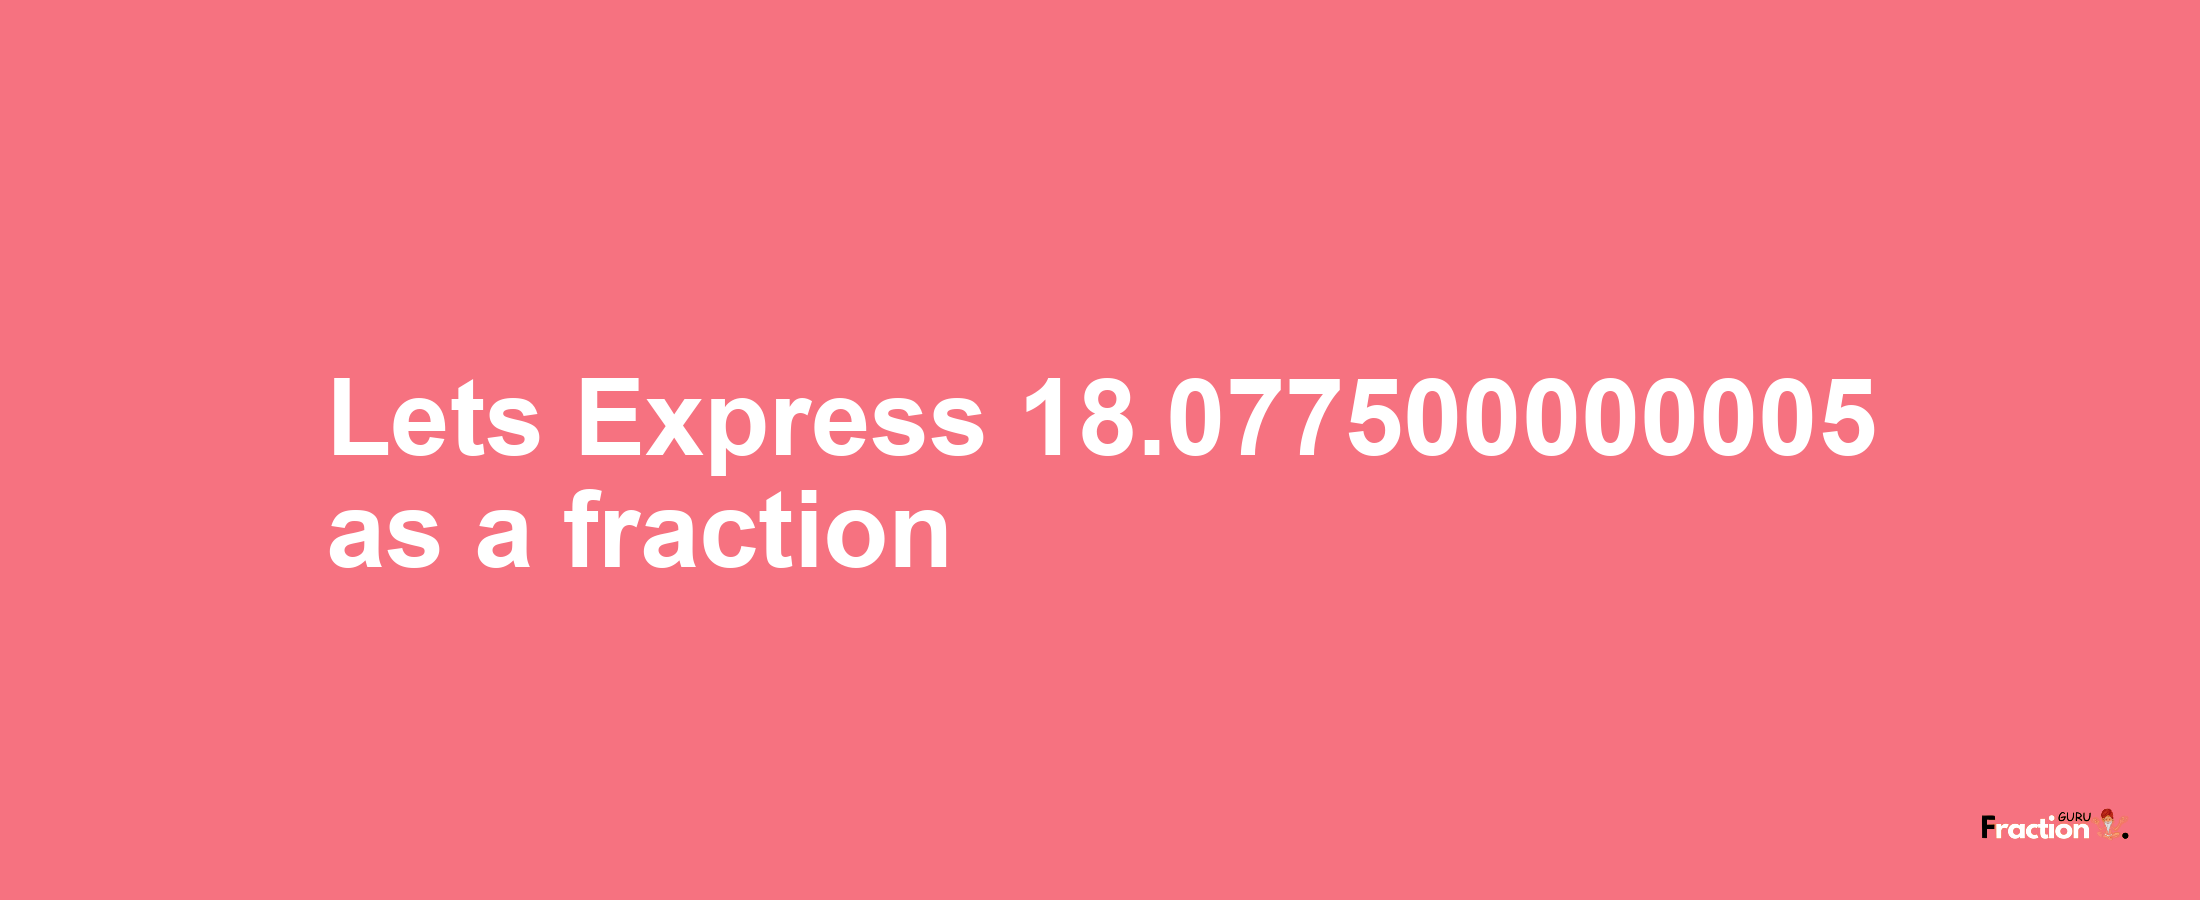 Lets Express 18.077500000005 as afraction